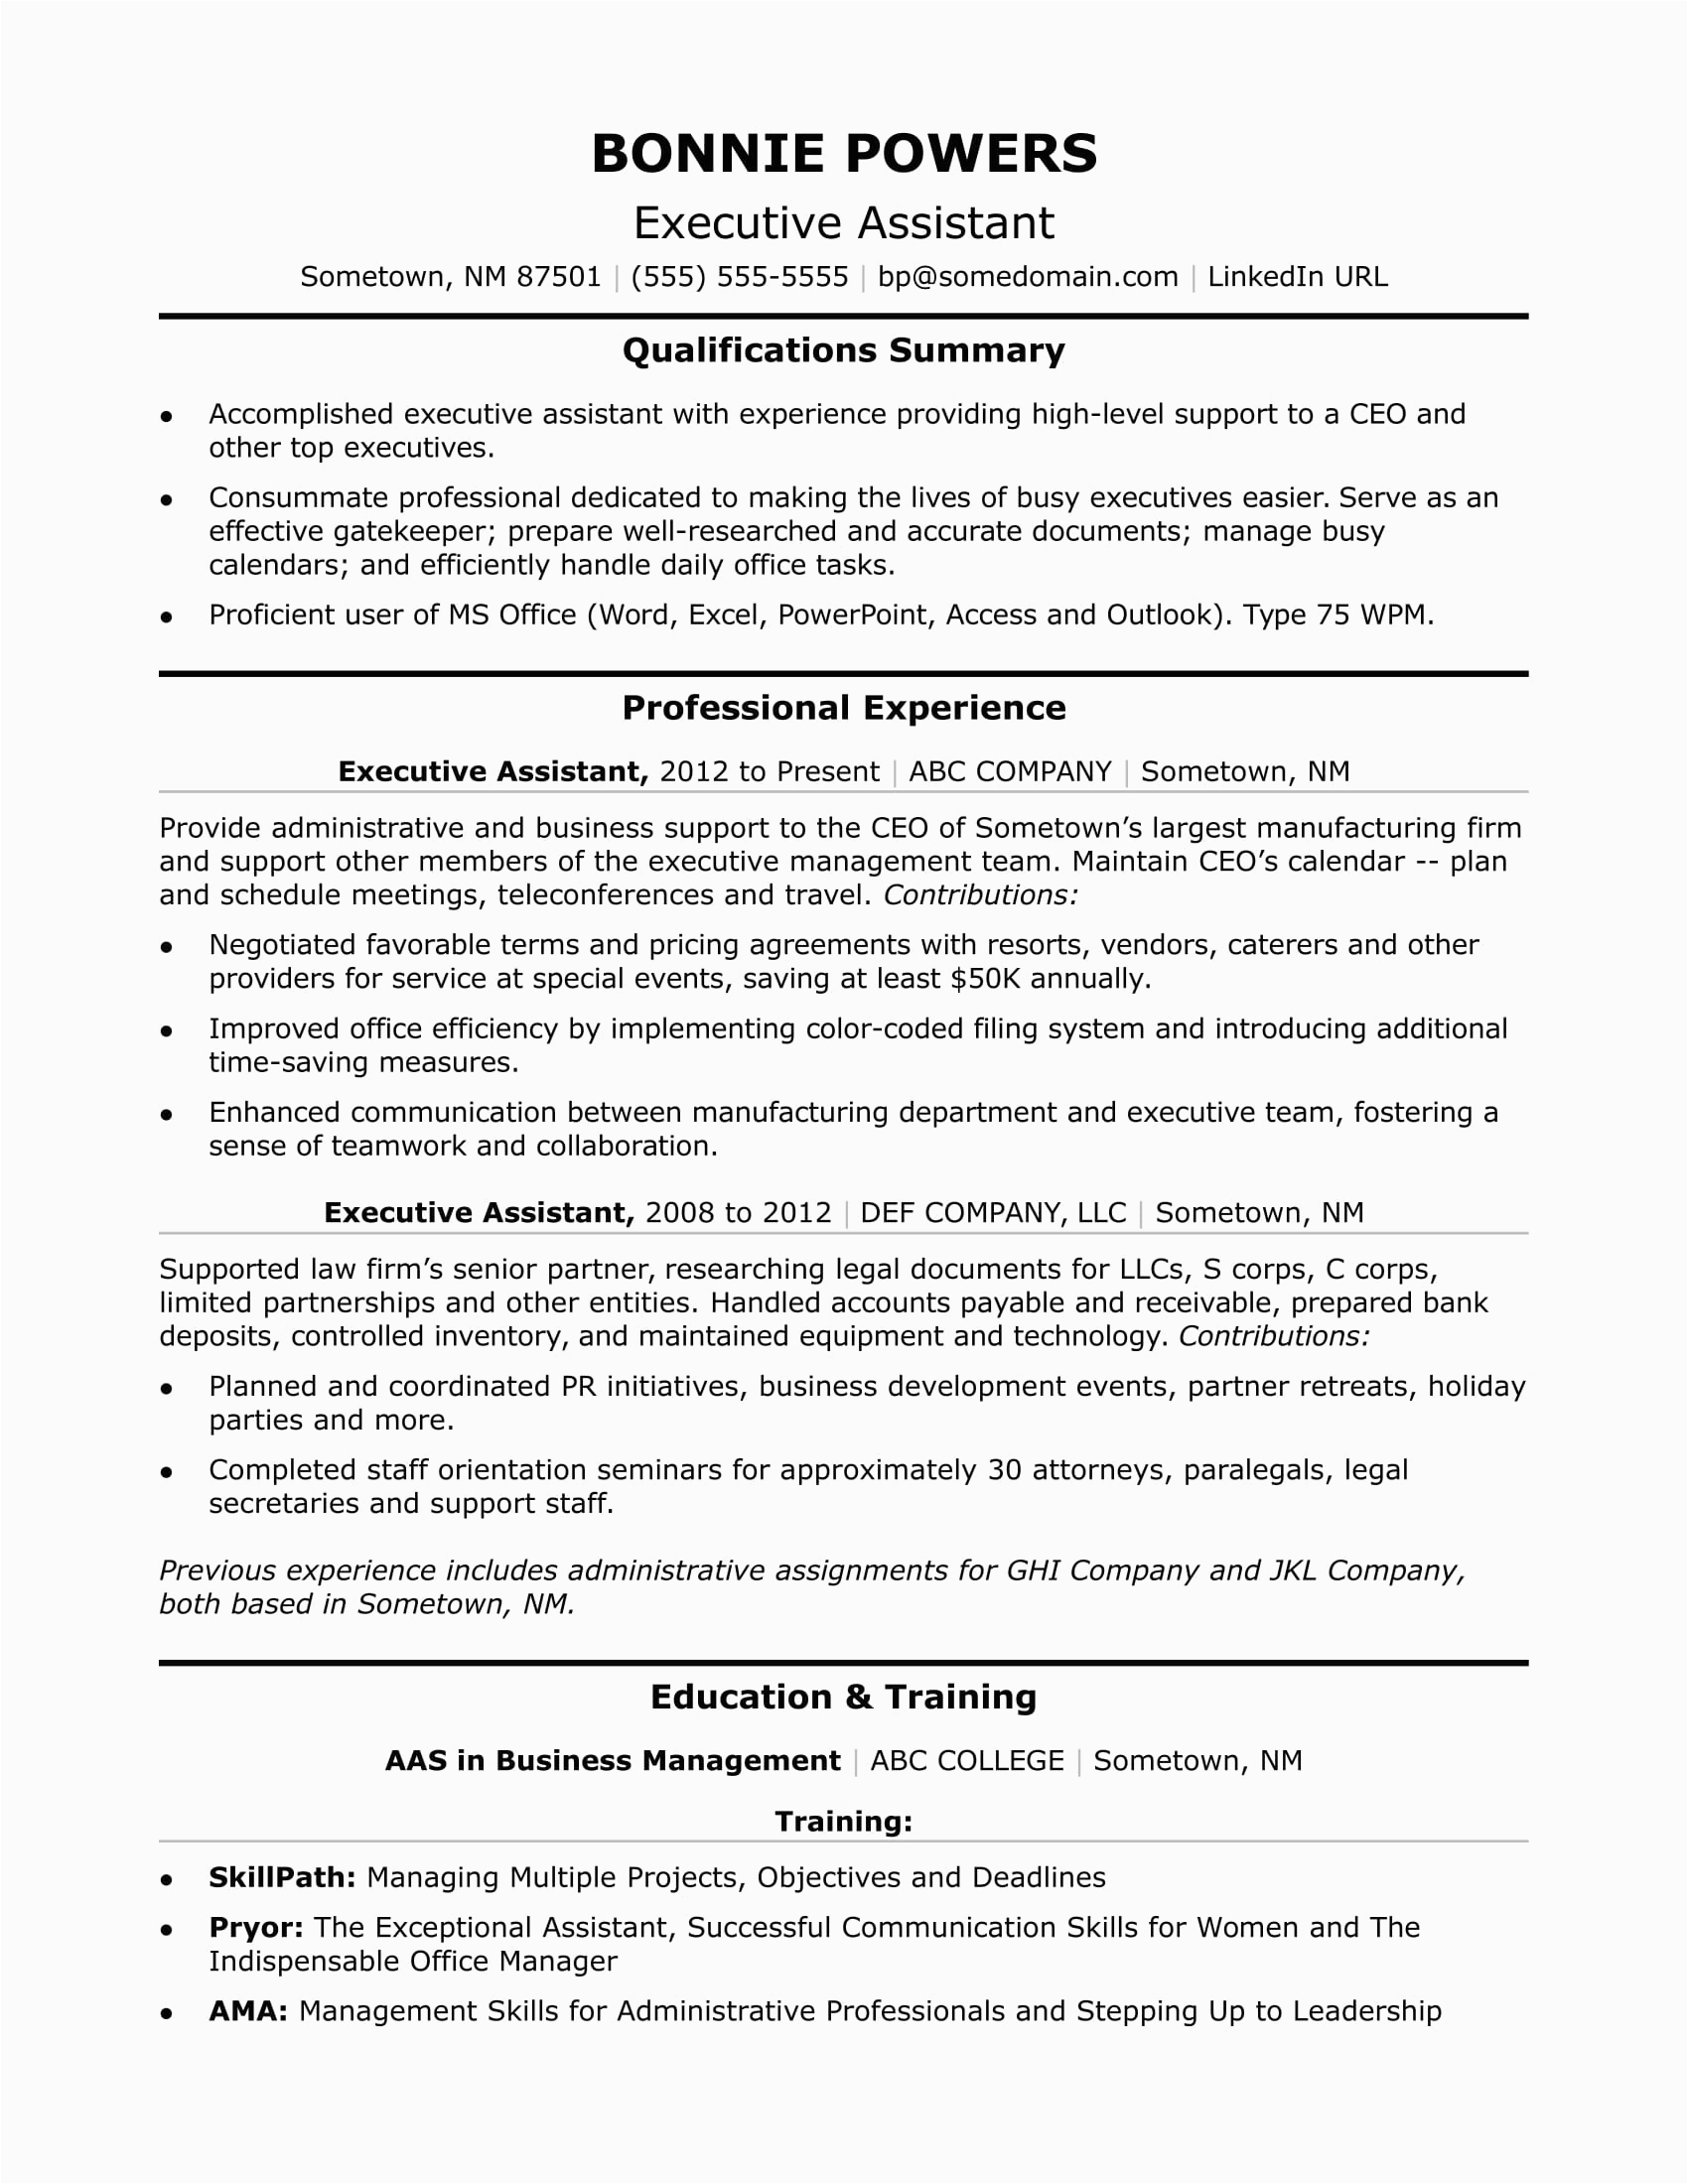 sample resume executive assistant